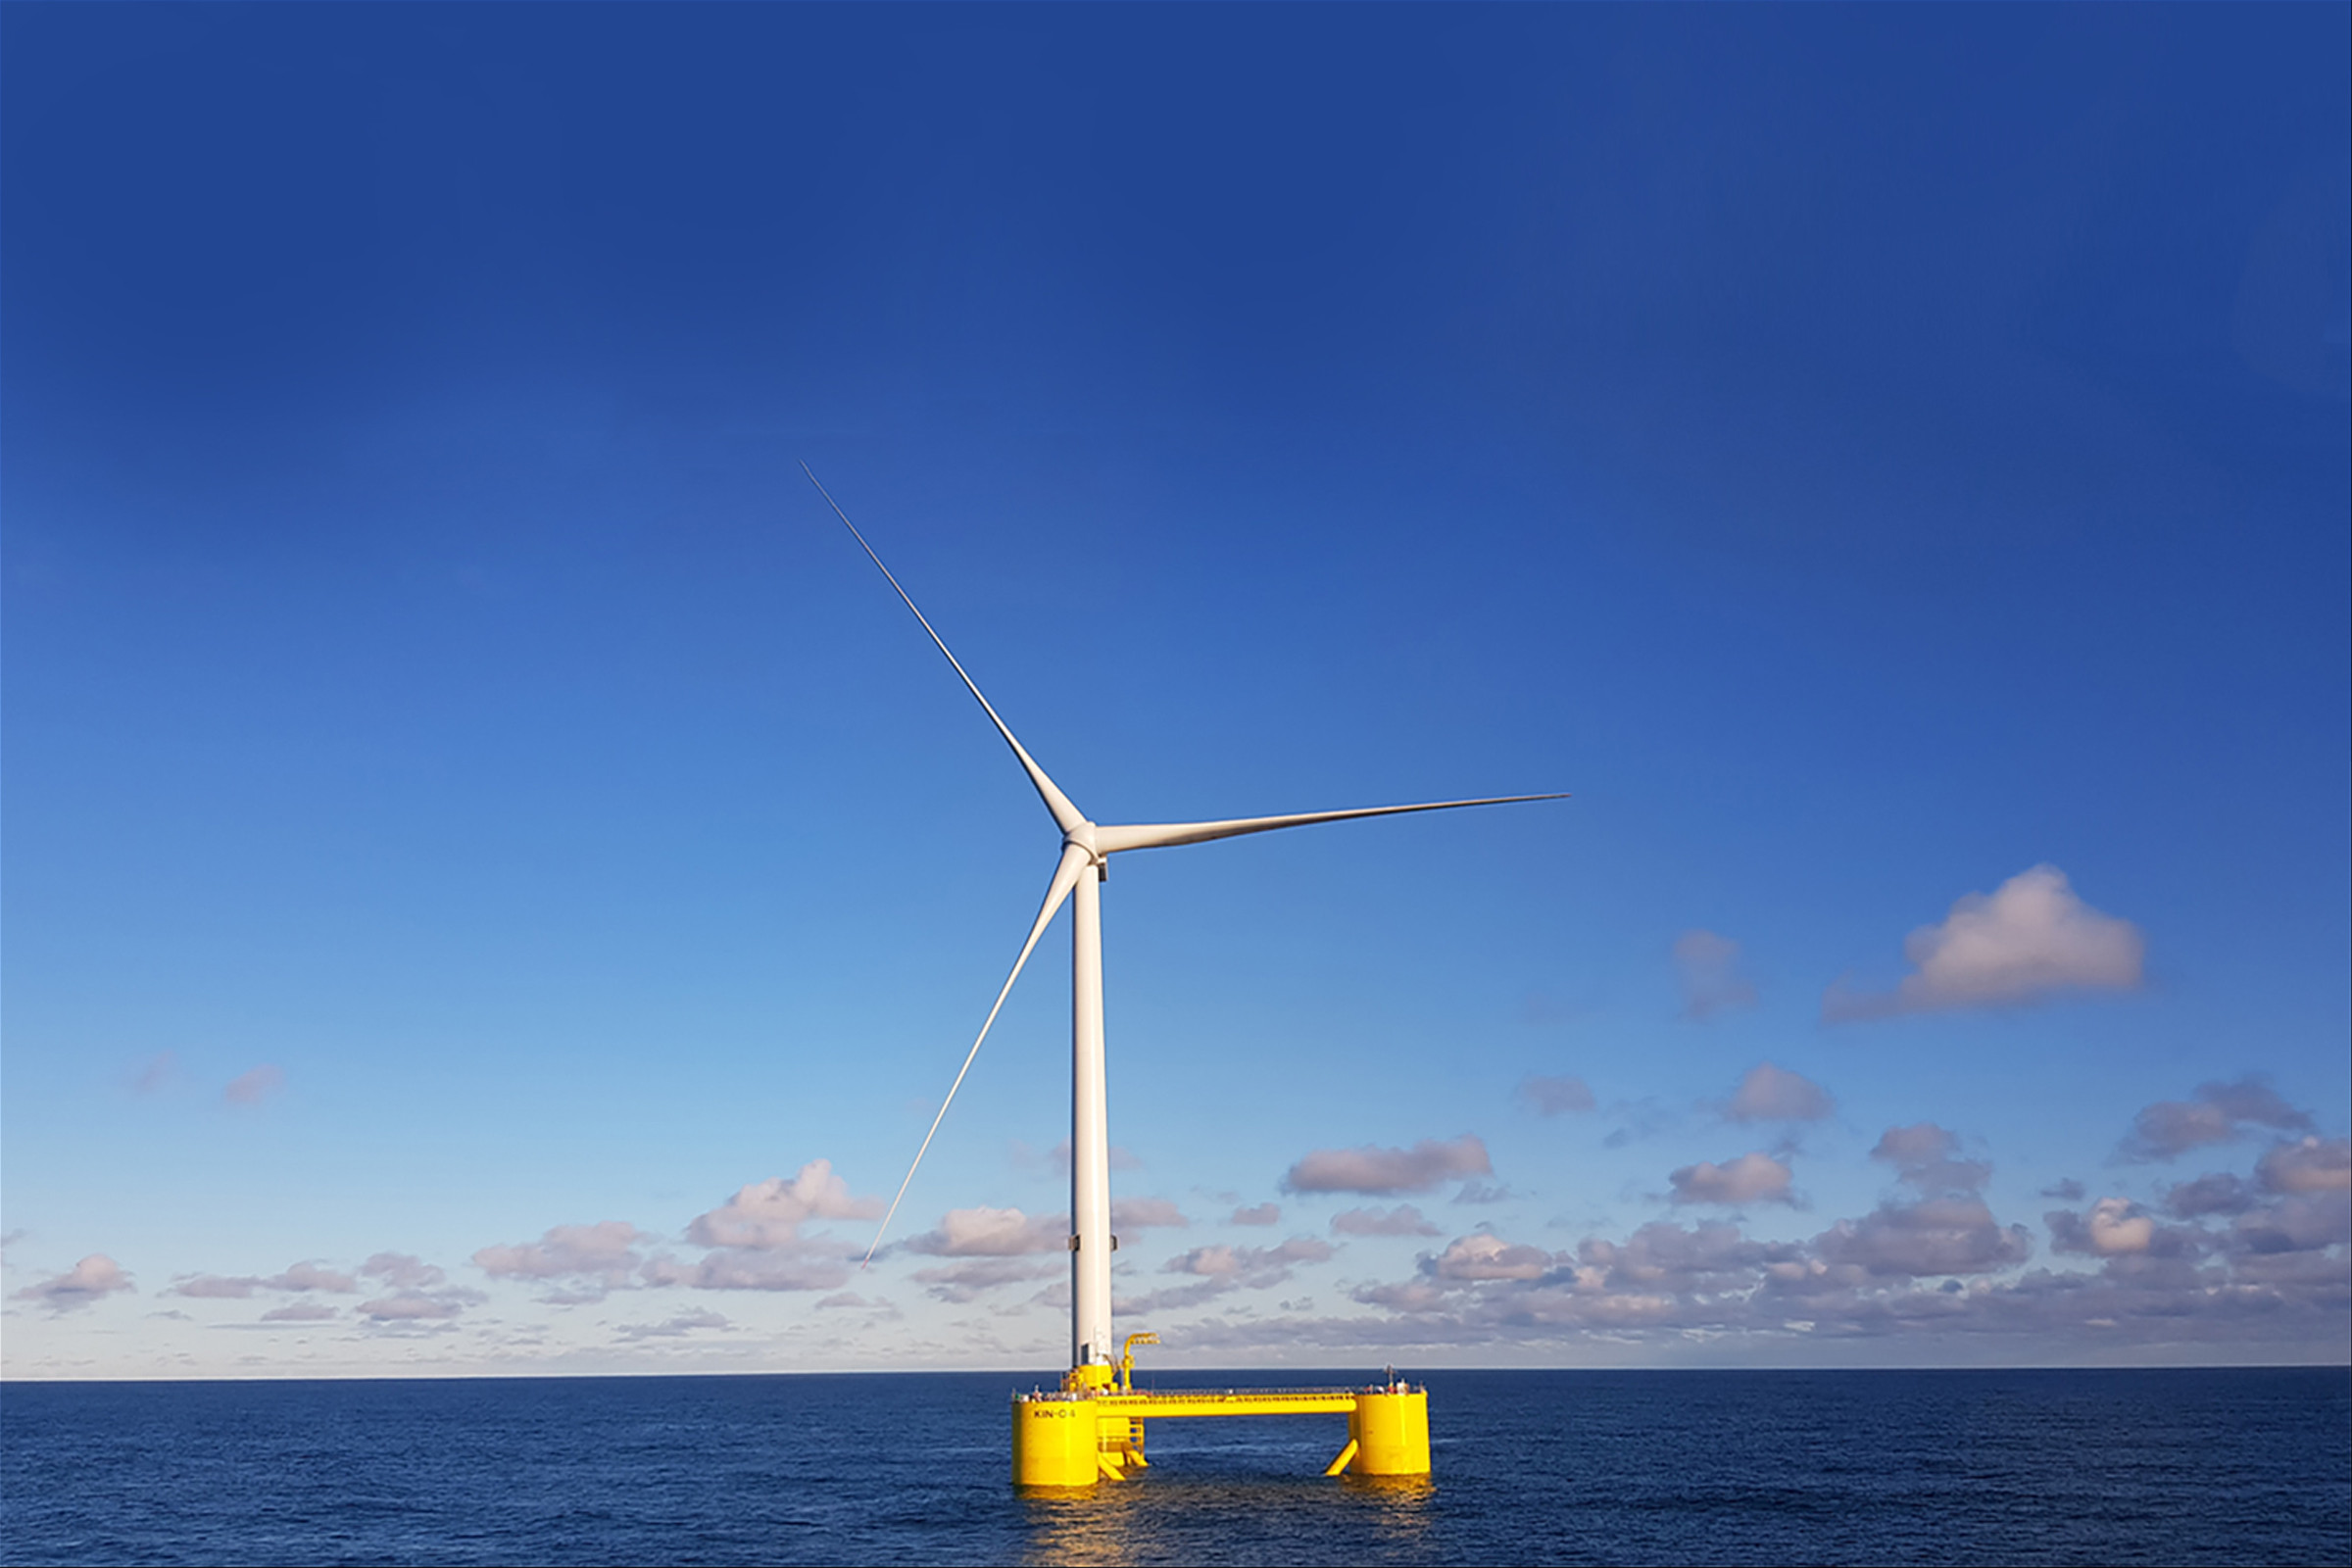 One of the installed floating wind turbines